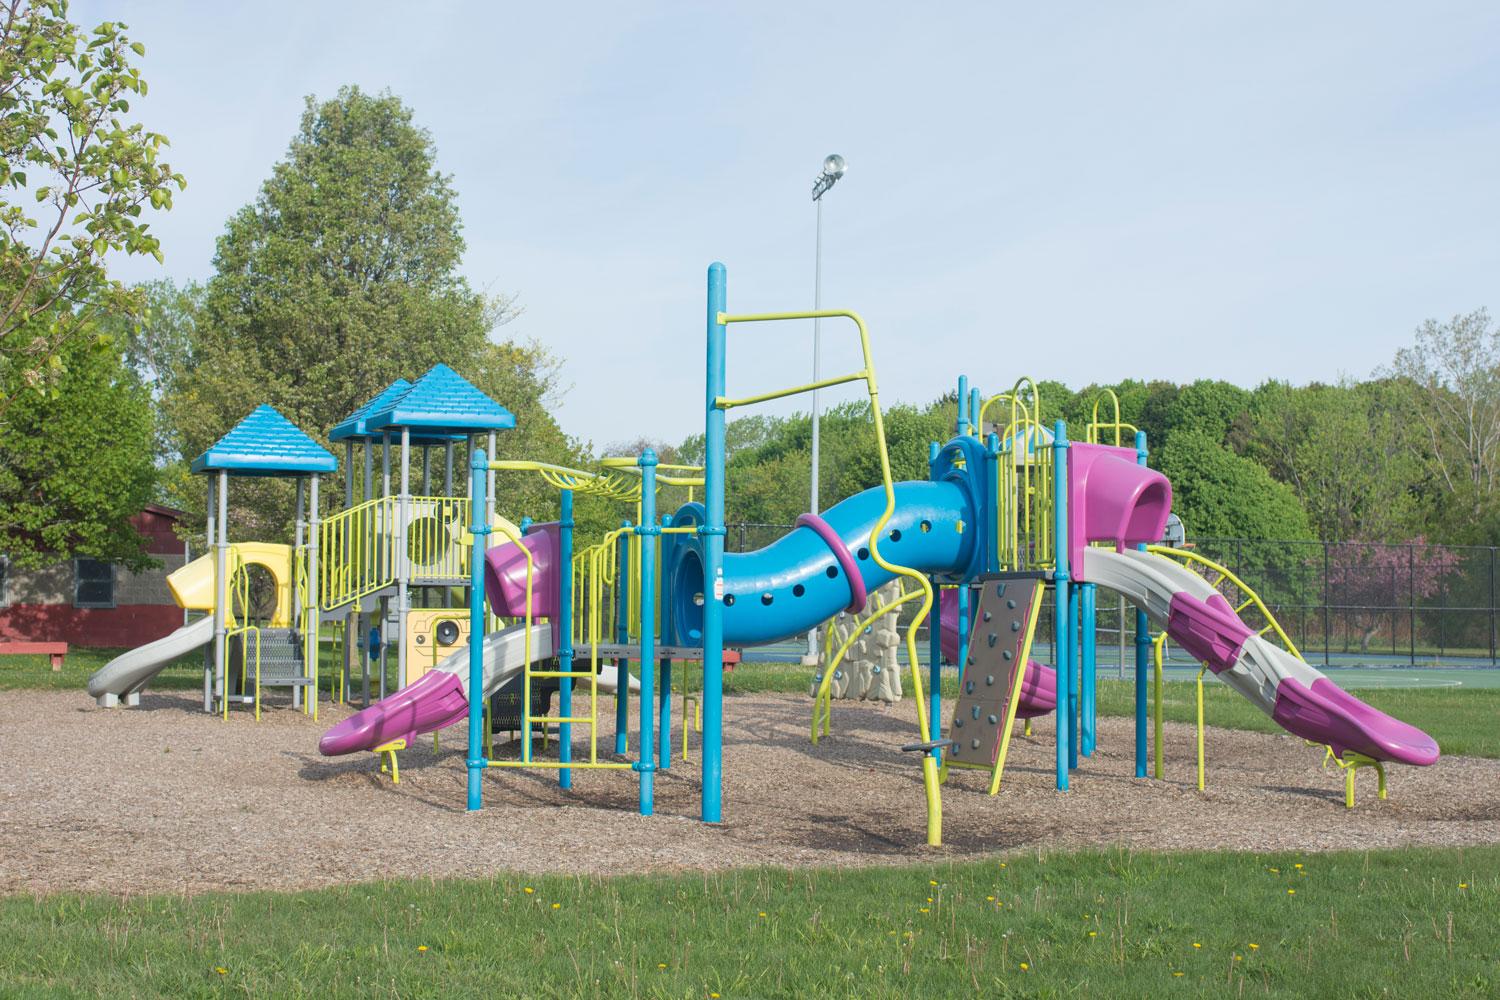 Playground: Colorful playground with blue, purple and neon green